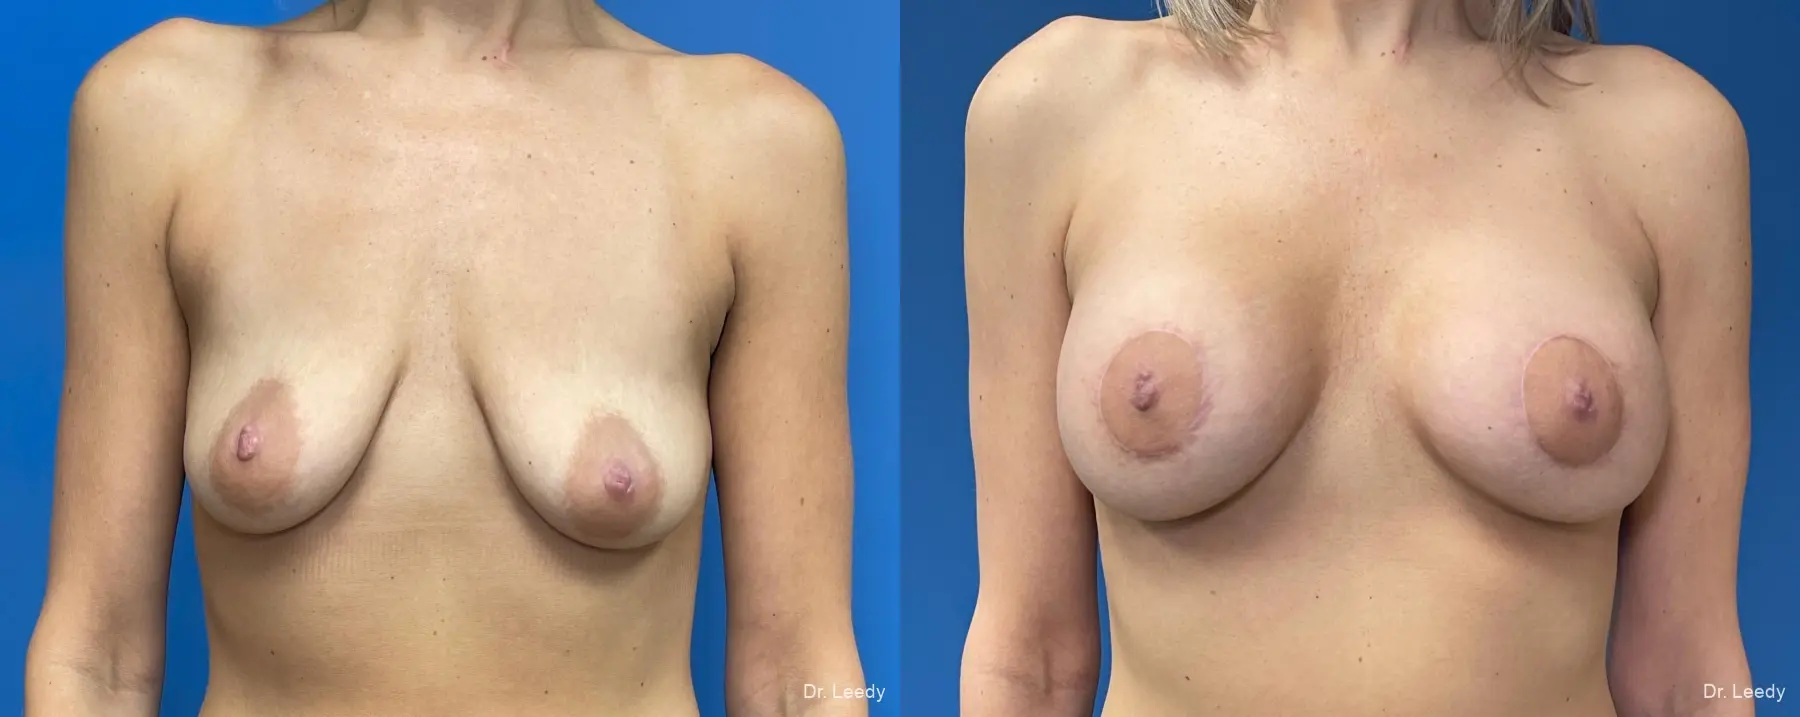 Breast Lift And Augmentation: Patient 2 - Before and After  